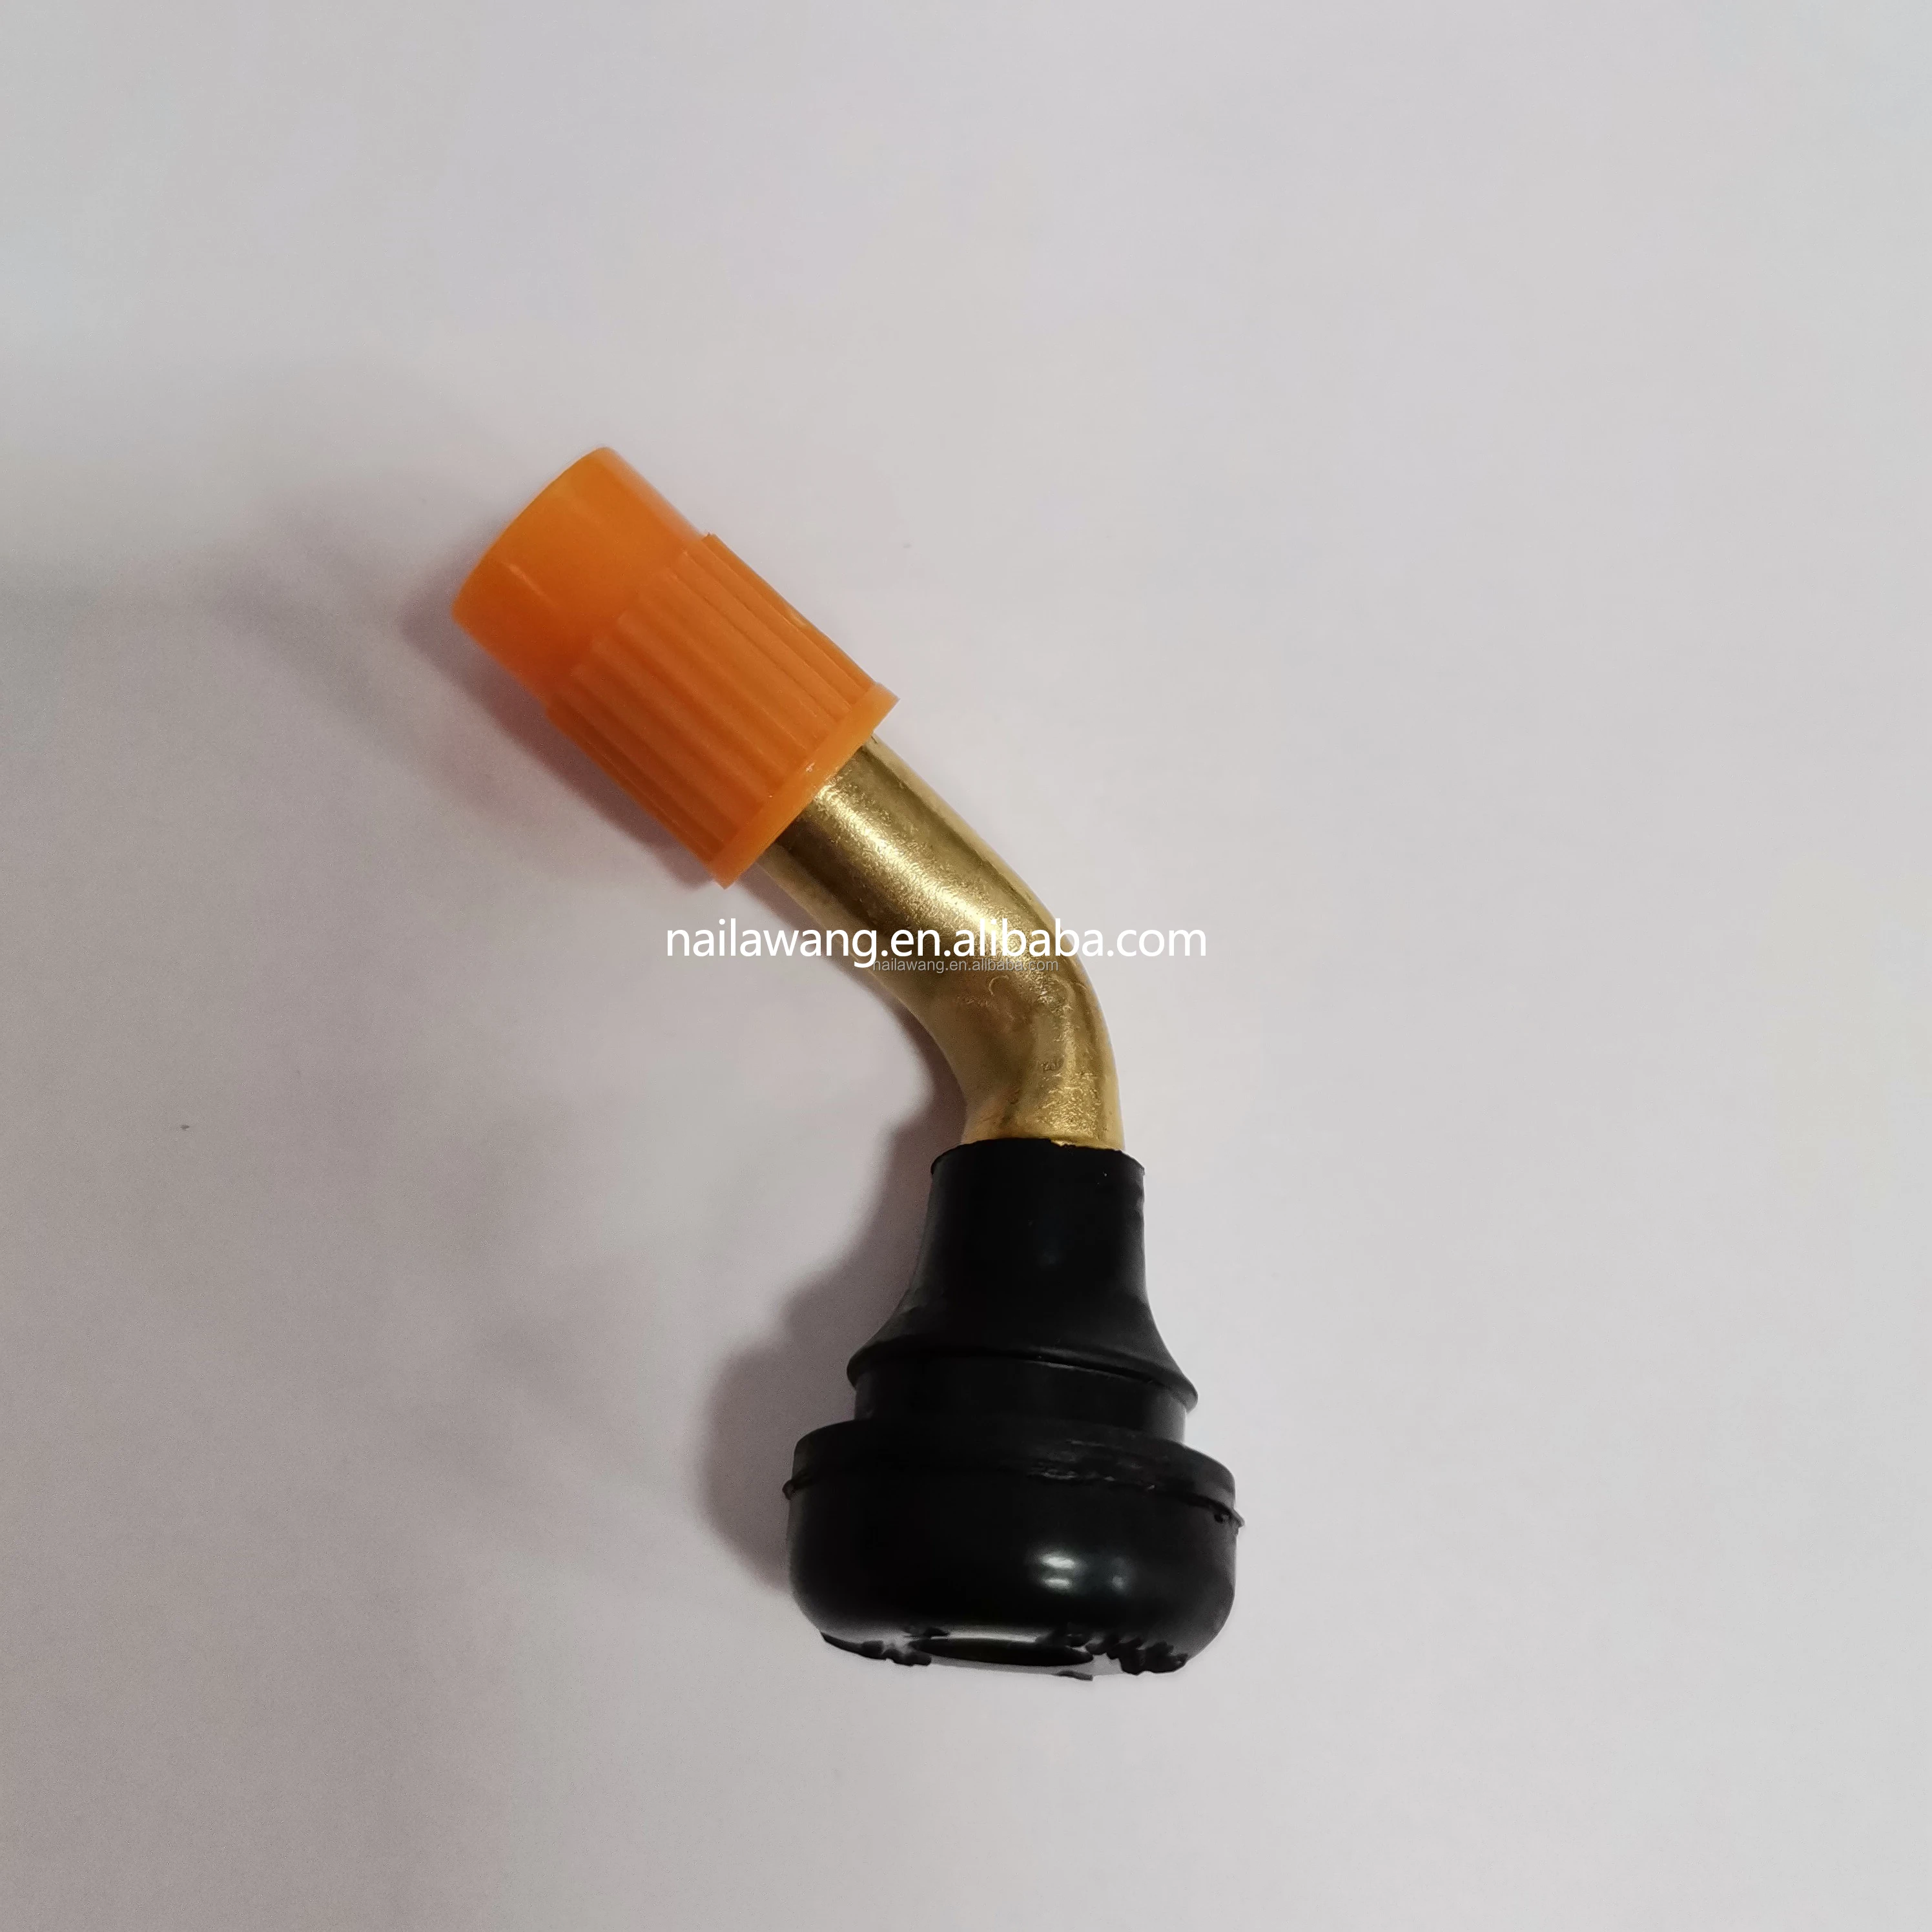 Universal Brass Stem Cap Rubber Tubeless 45 Degree PVR50 Tire Valve  for Electric Motorcycle Scooter